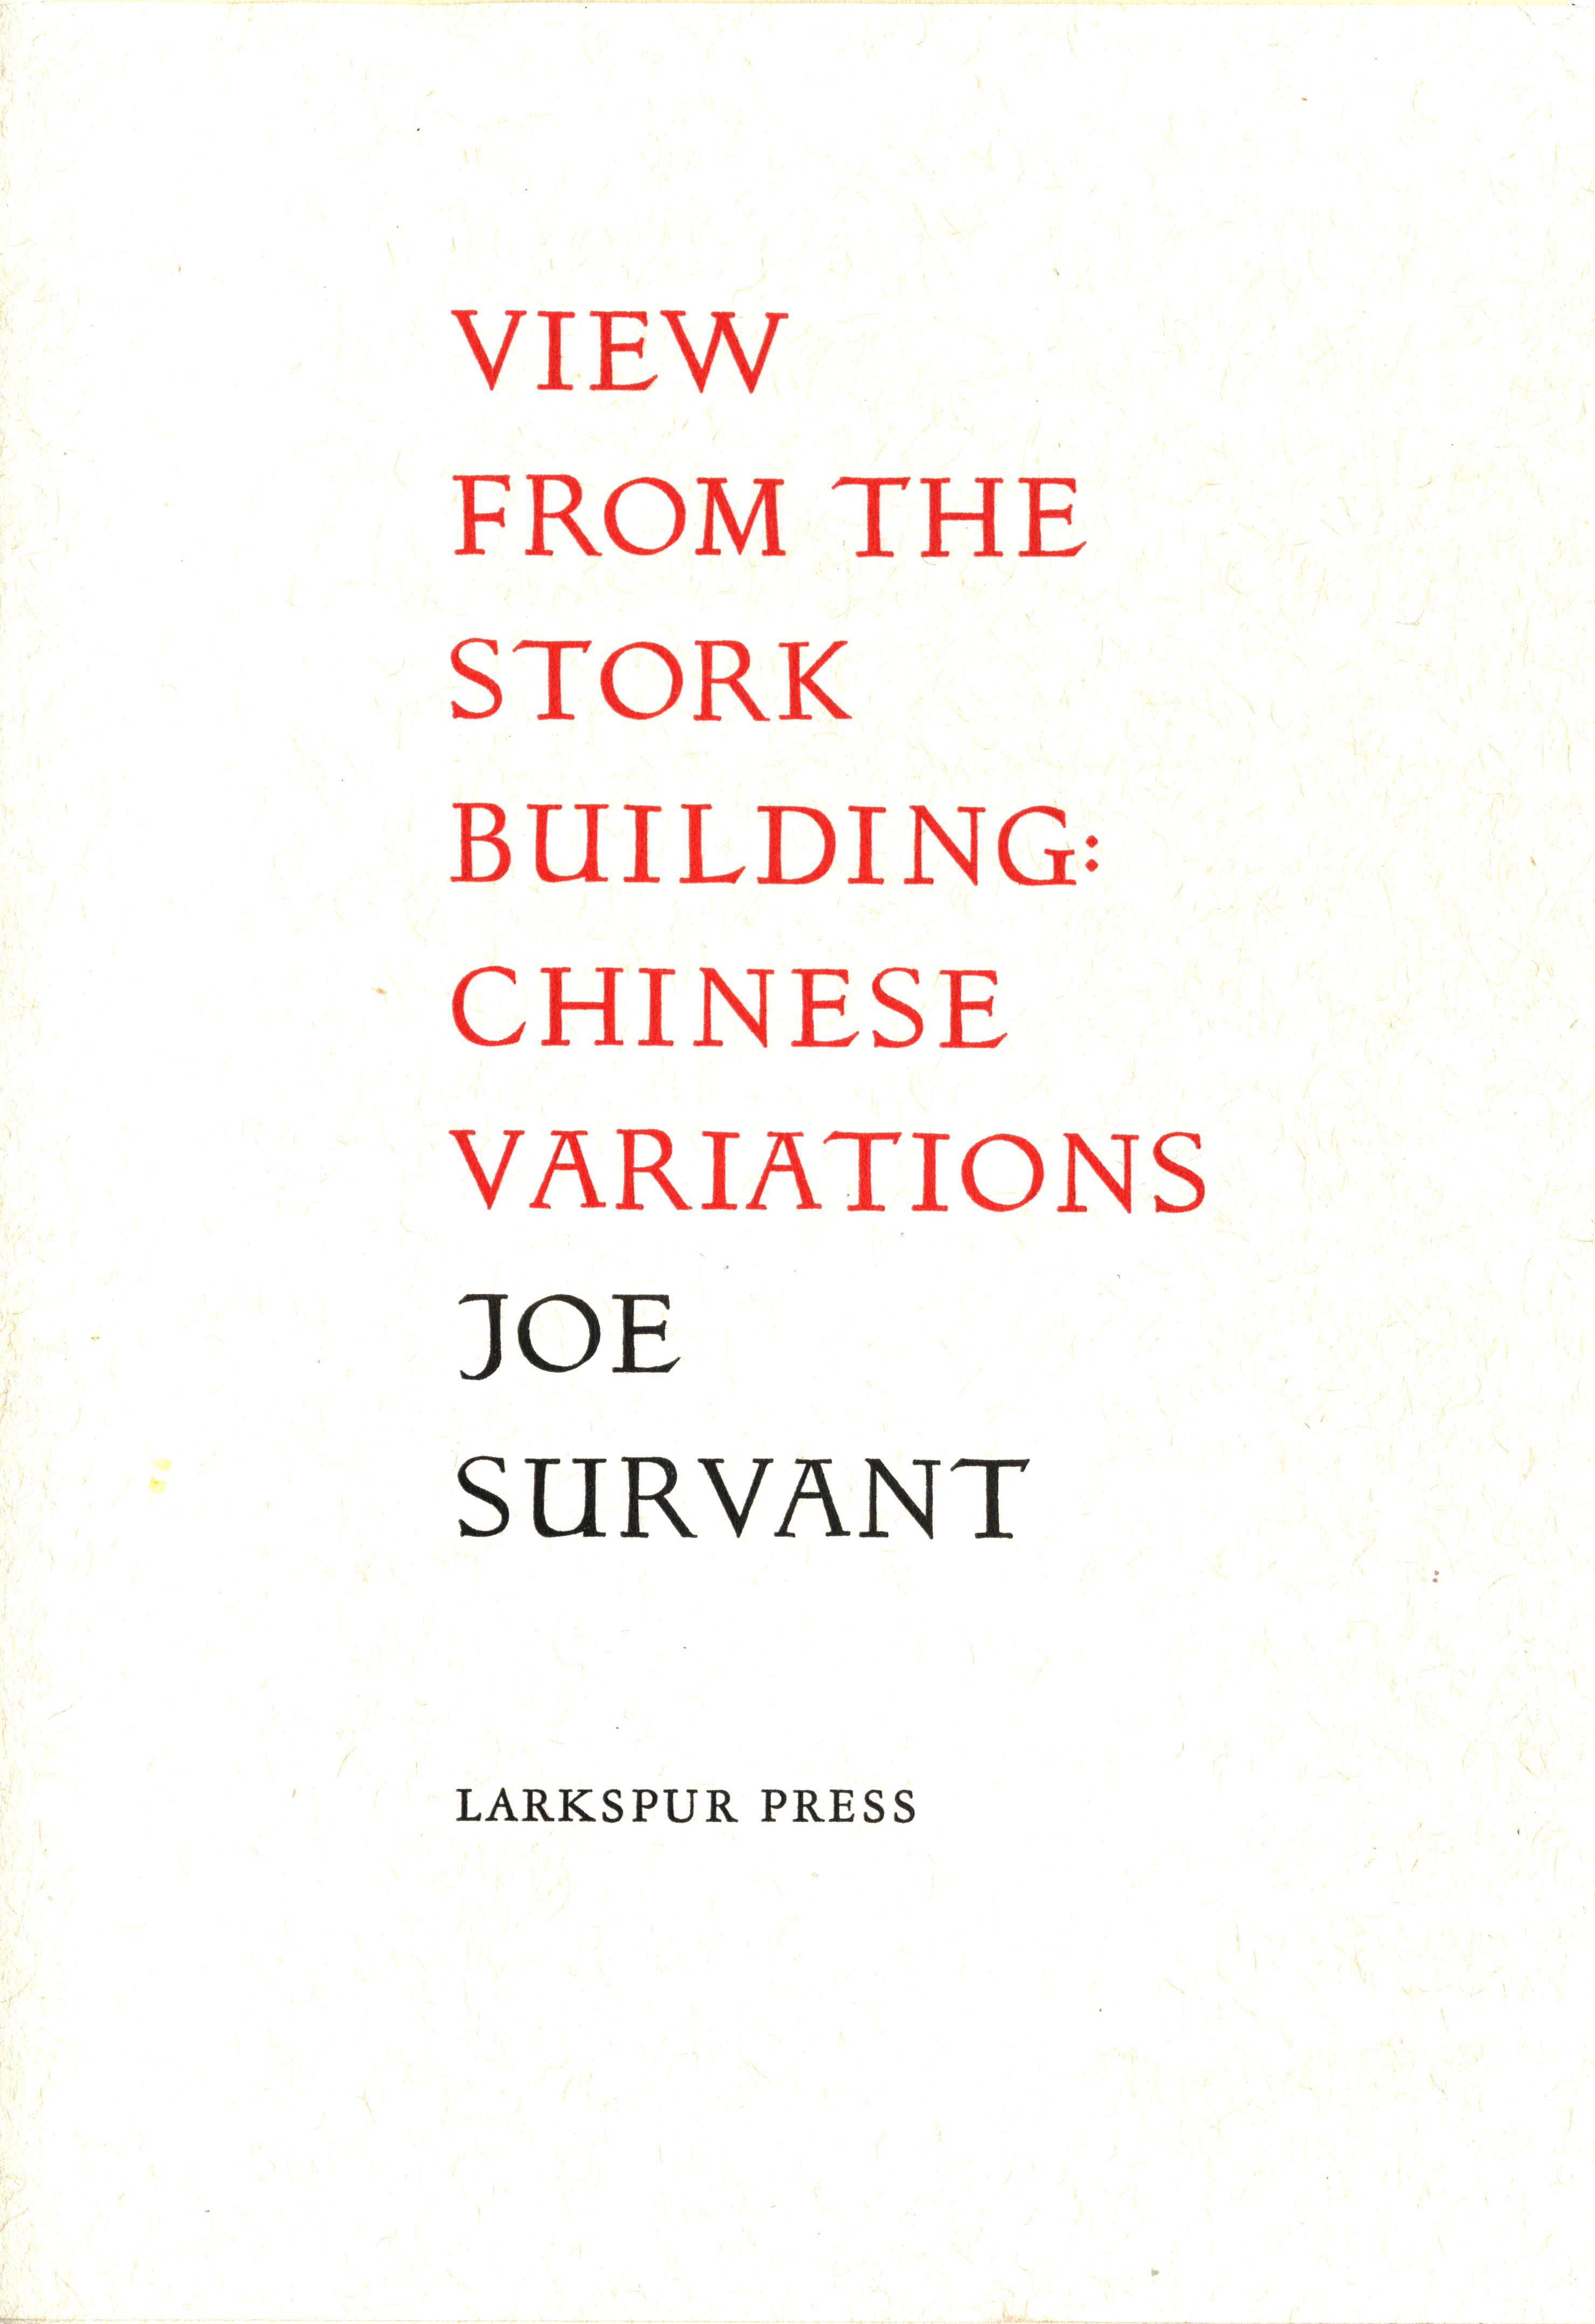 Book cover - View from the Stork Building by Joe Survant